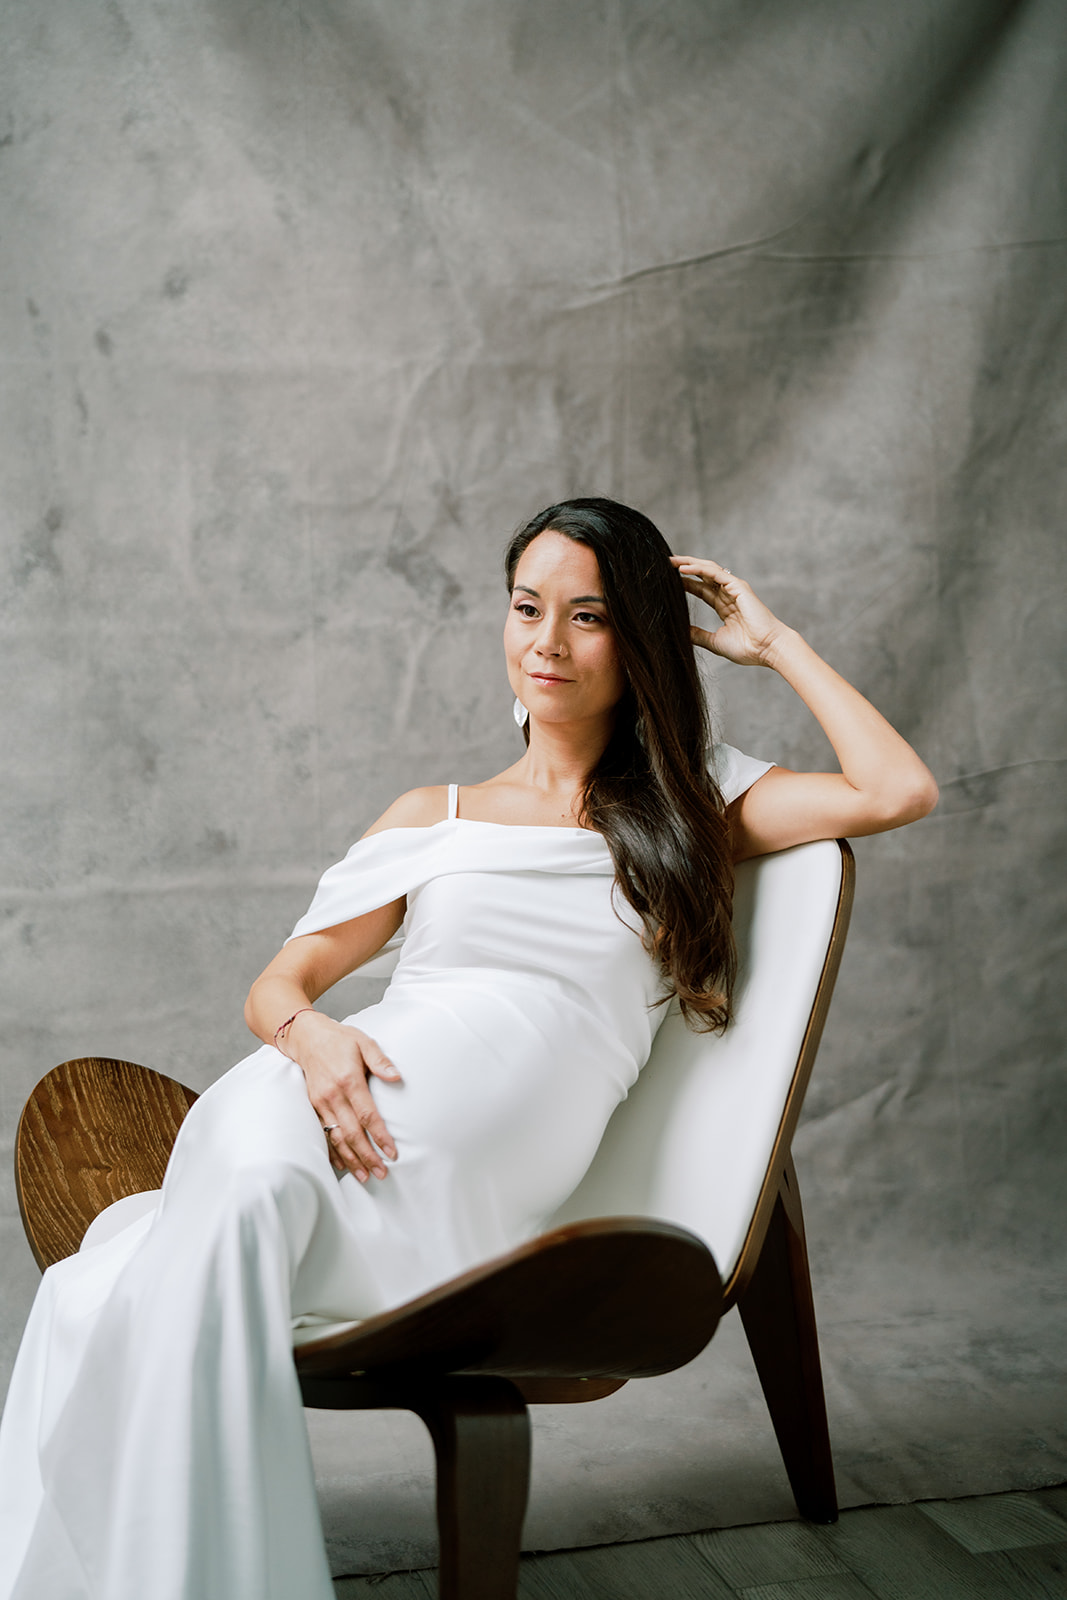 A pregnant woman in a white dress sitting in a chair during her maternity photography studio session.